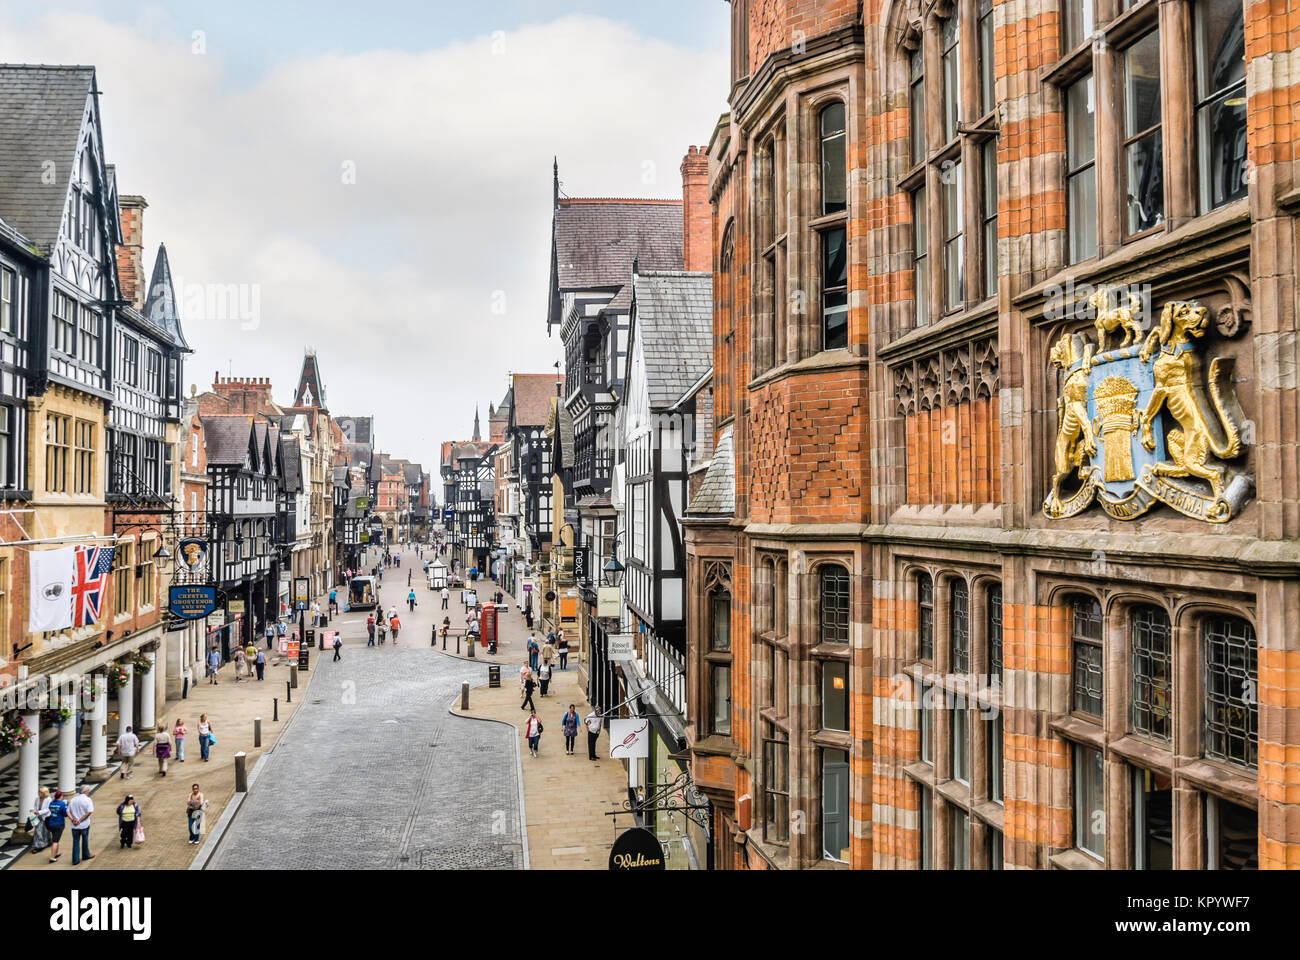 Cityscape in the old town of Chester, Cheshire, England, UK Stock Photo